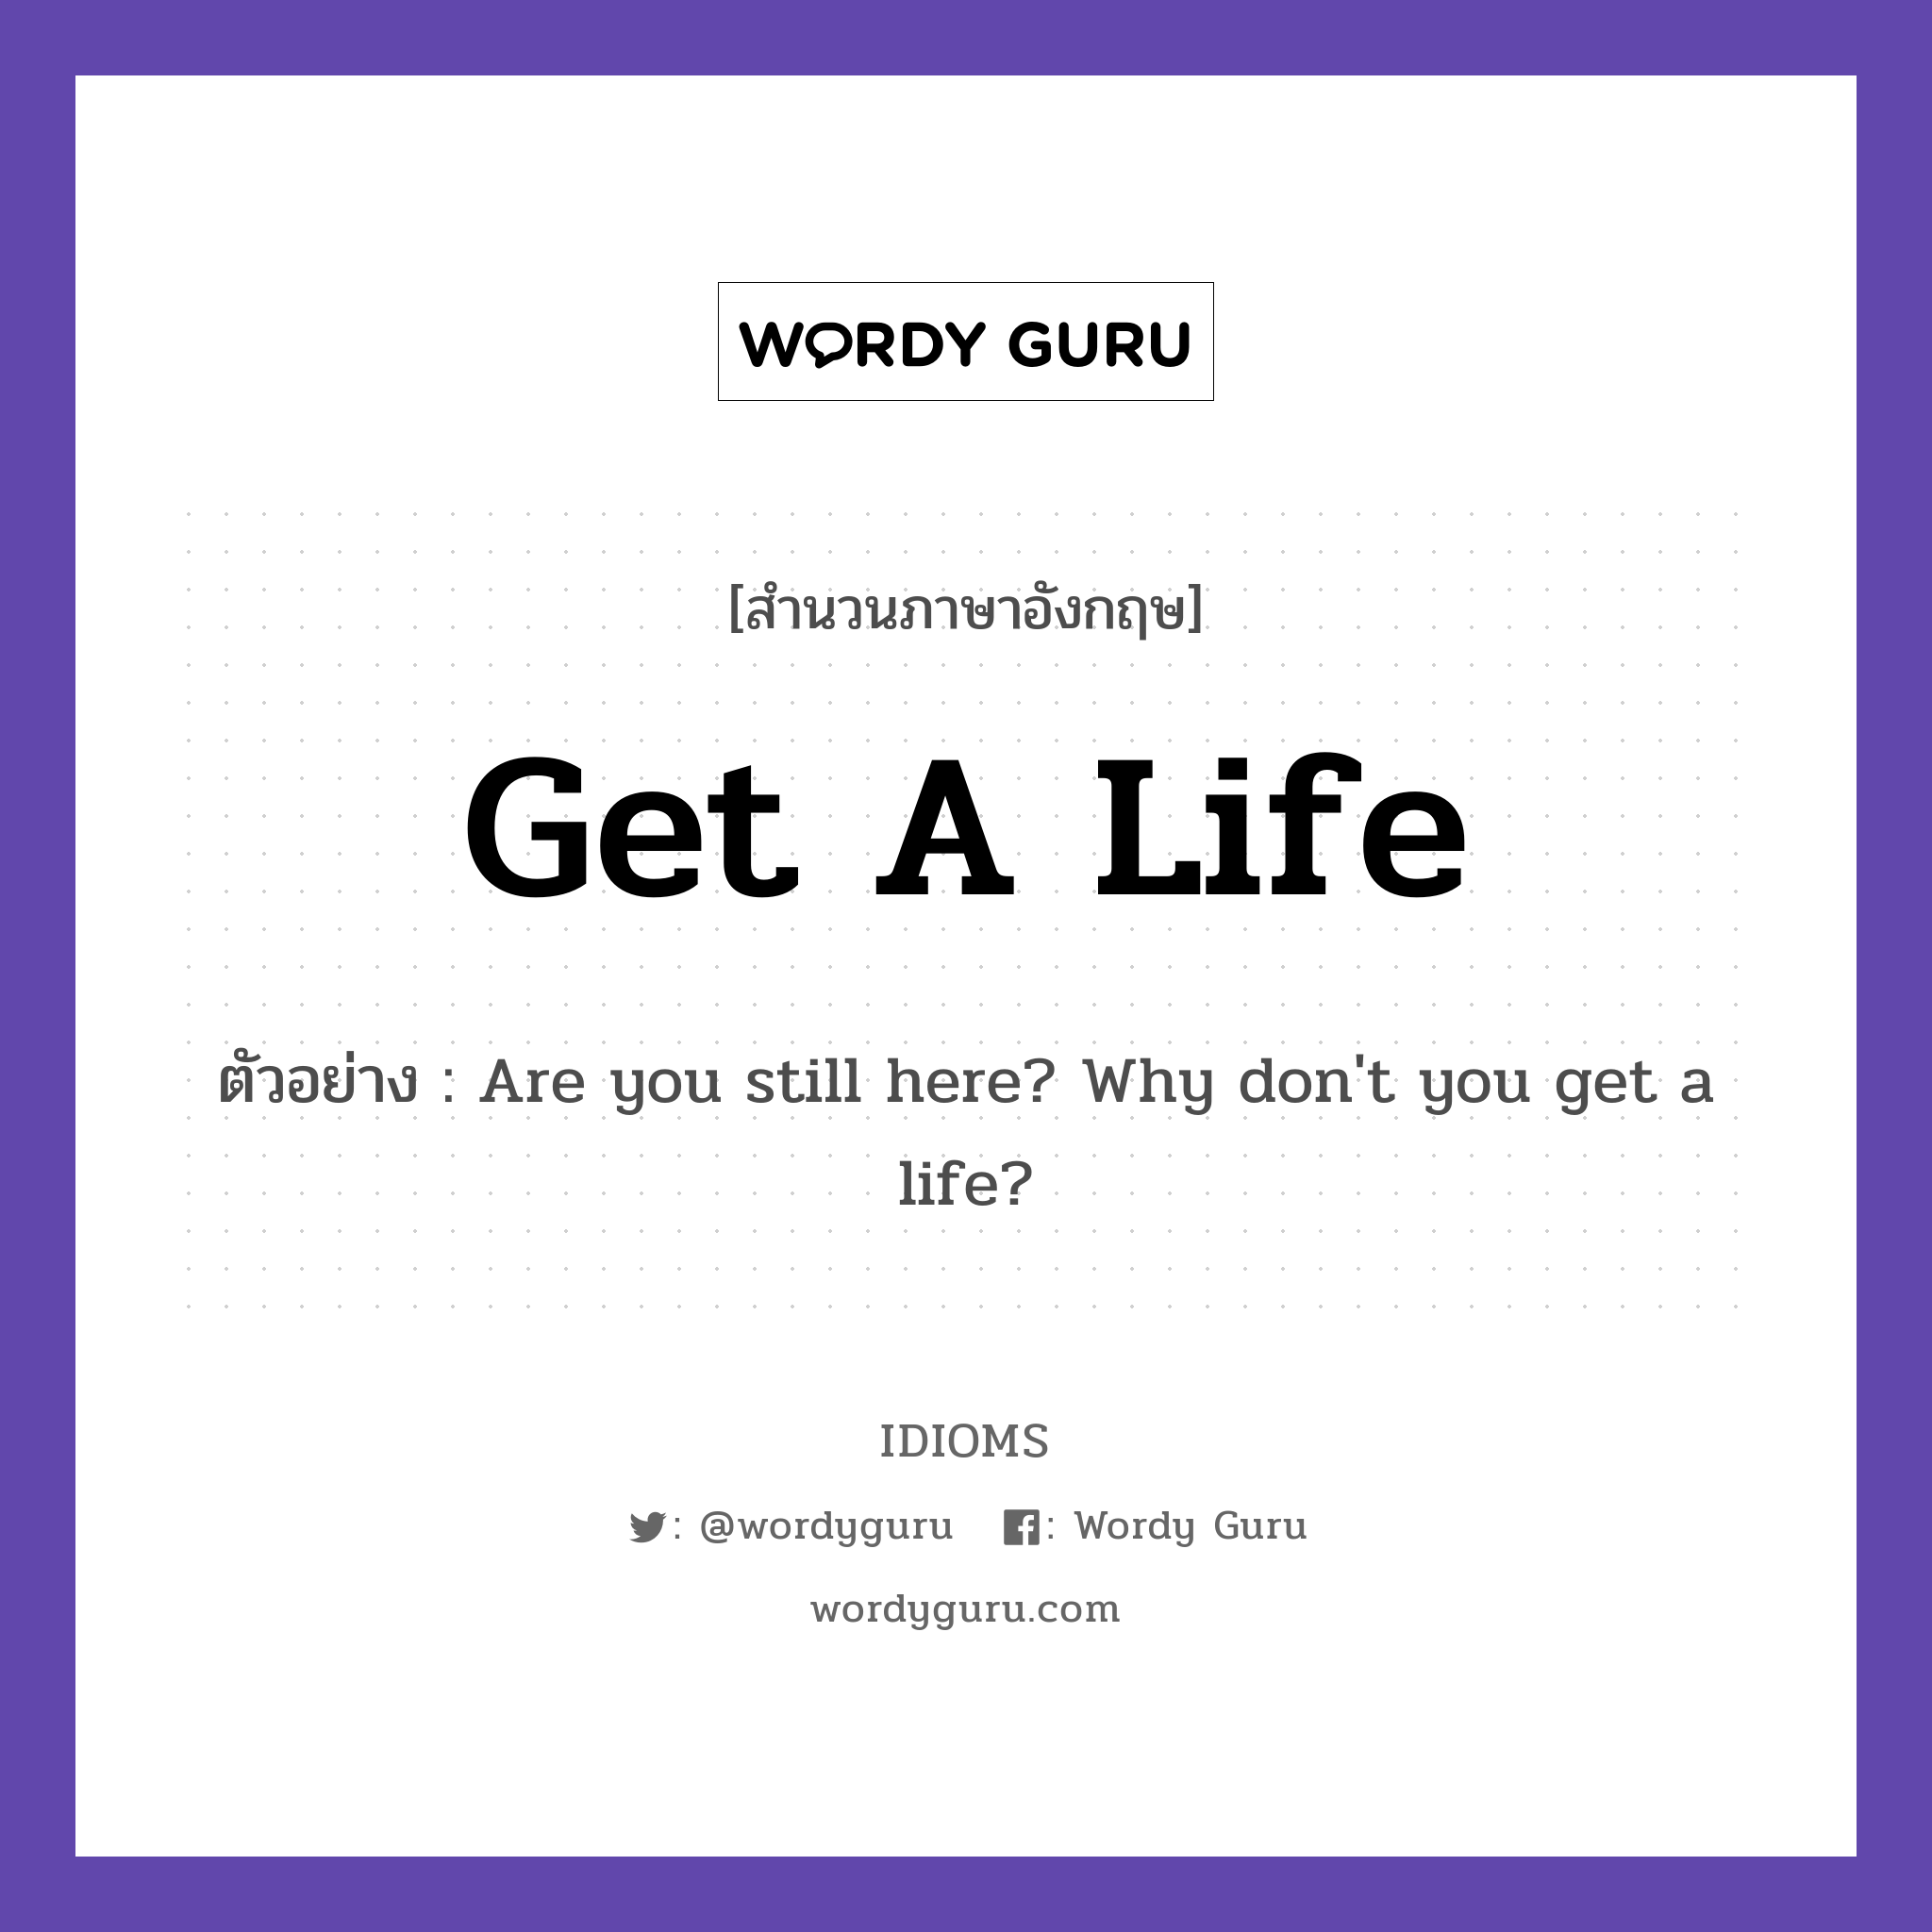 Get A Life แปลว่า?, สำนวนภาษาอังกฤษ Get A Life ตัวอย่าง Are you still here? Why don't you get a life?